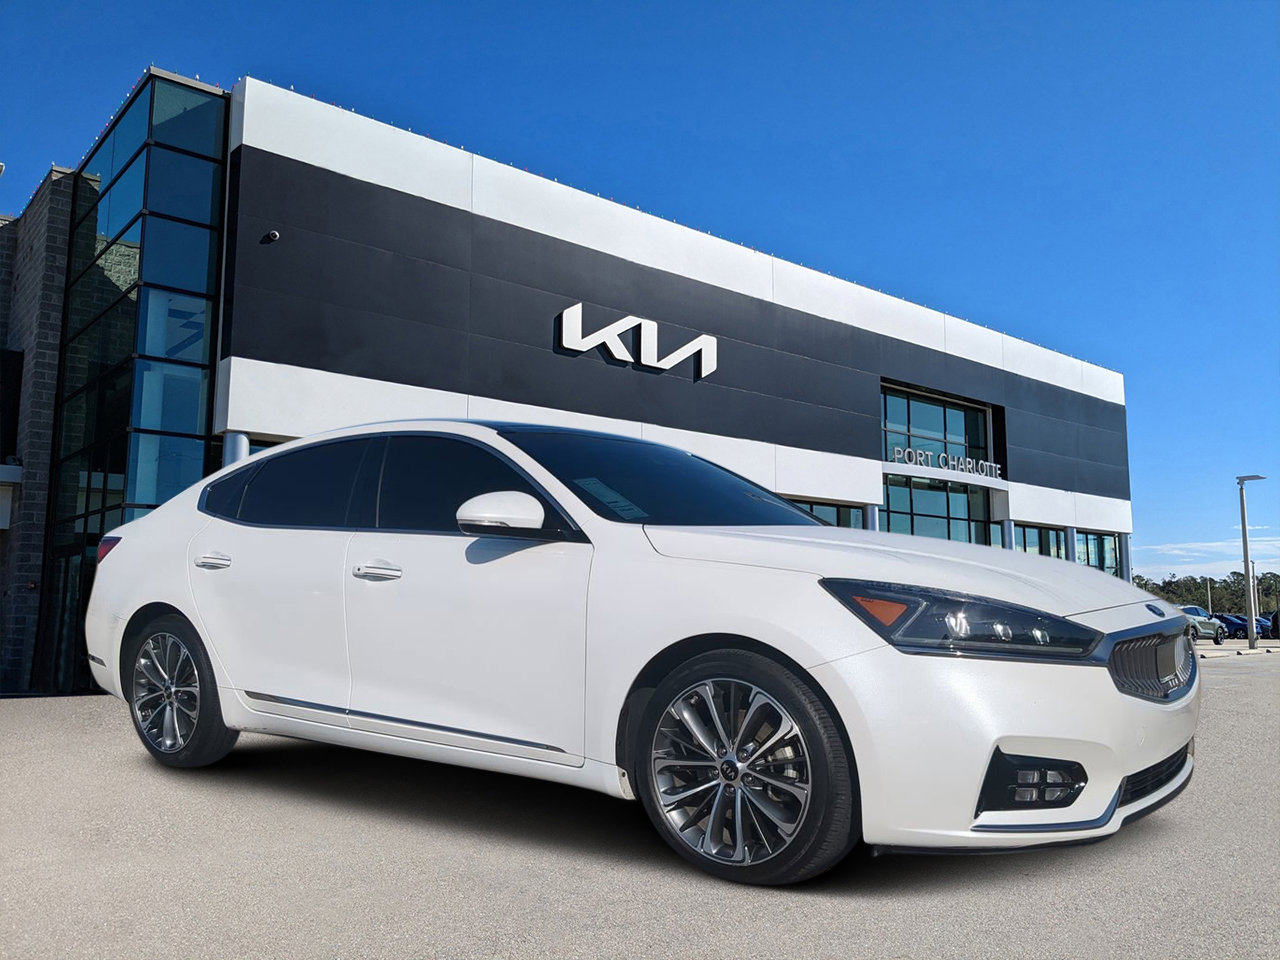 Certified Pre-Owned 2019 Kia Cadenza Technology 4dr Car in Port Charlotte  #G353390A | Kia of Port Charlotte